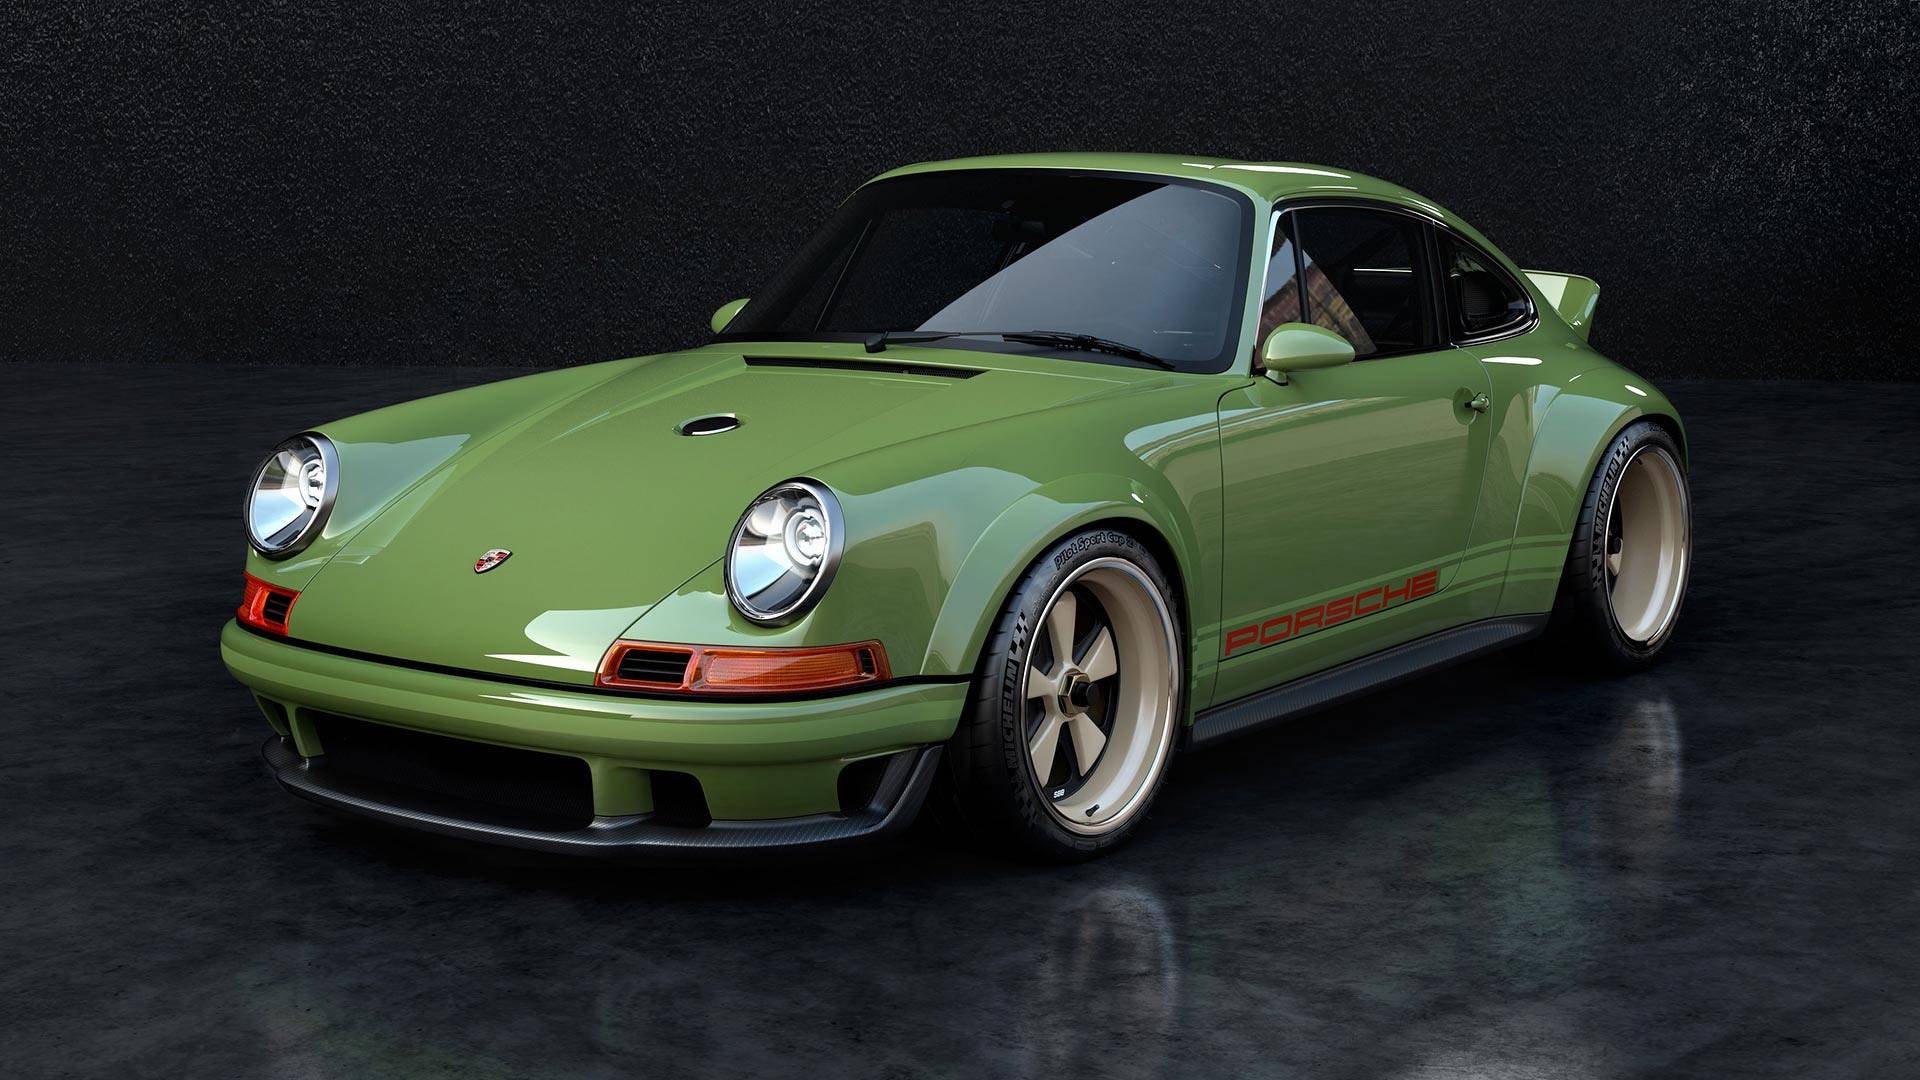 singer-s-new-500-hp-absinthe-porsche-911-is-the-ultimate-air-cooled-restomod_23.jpg